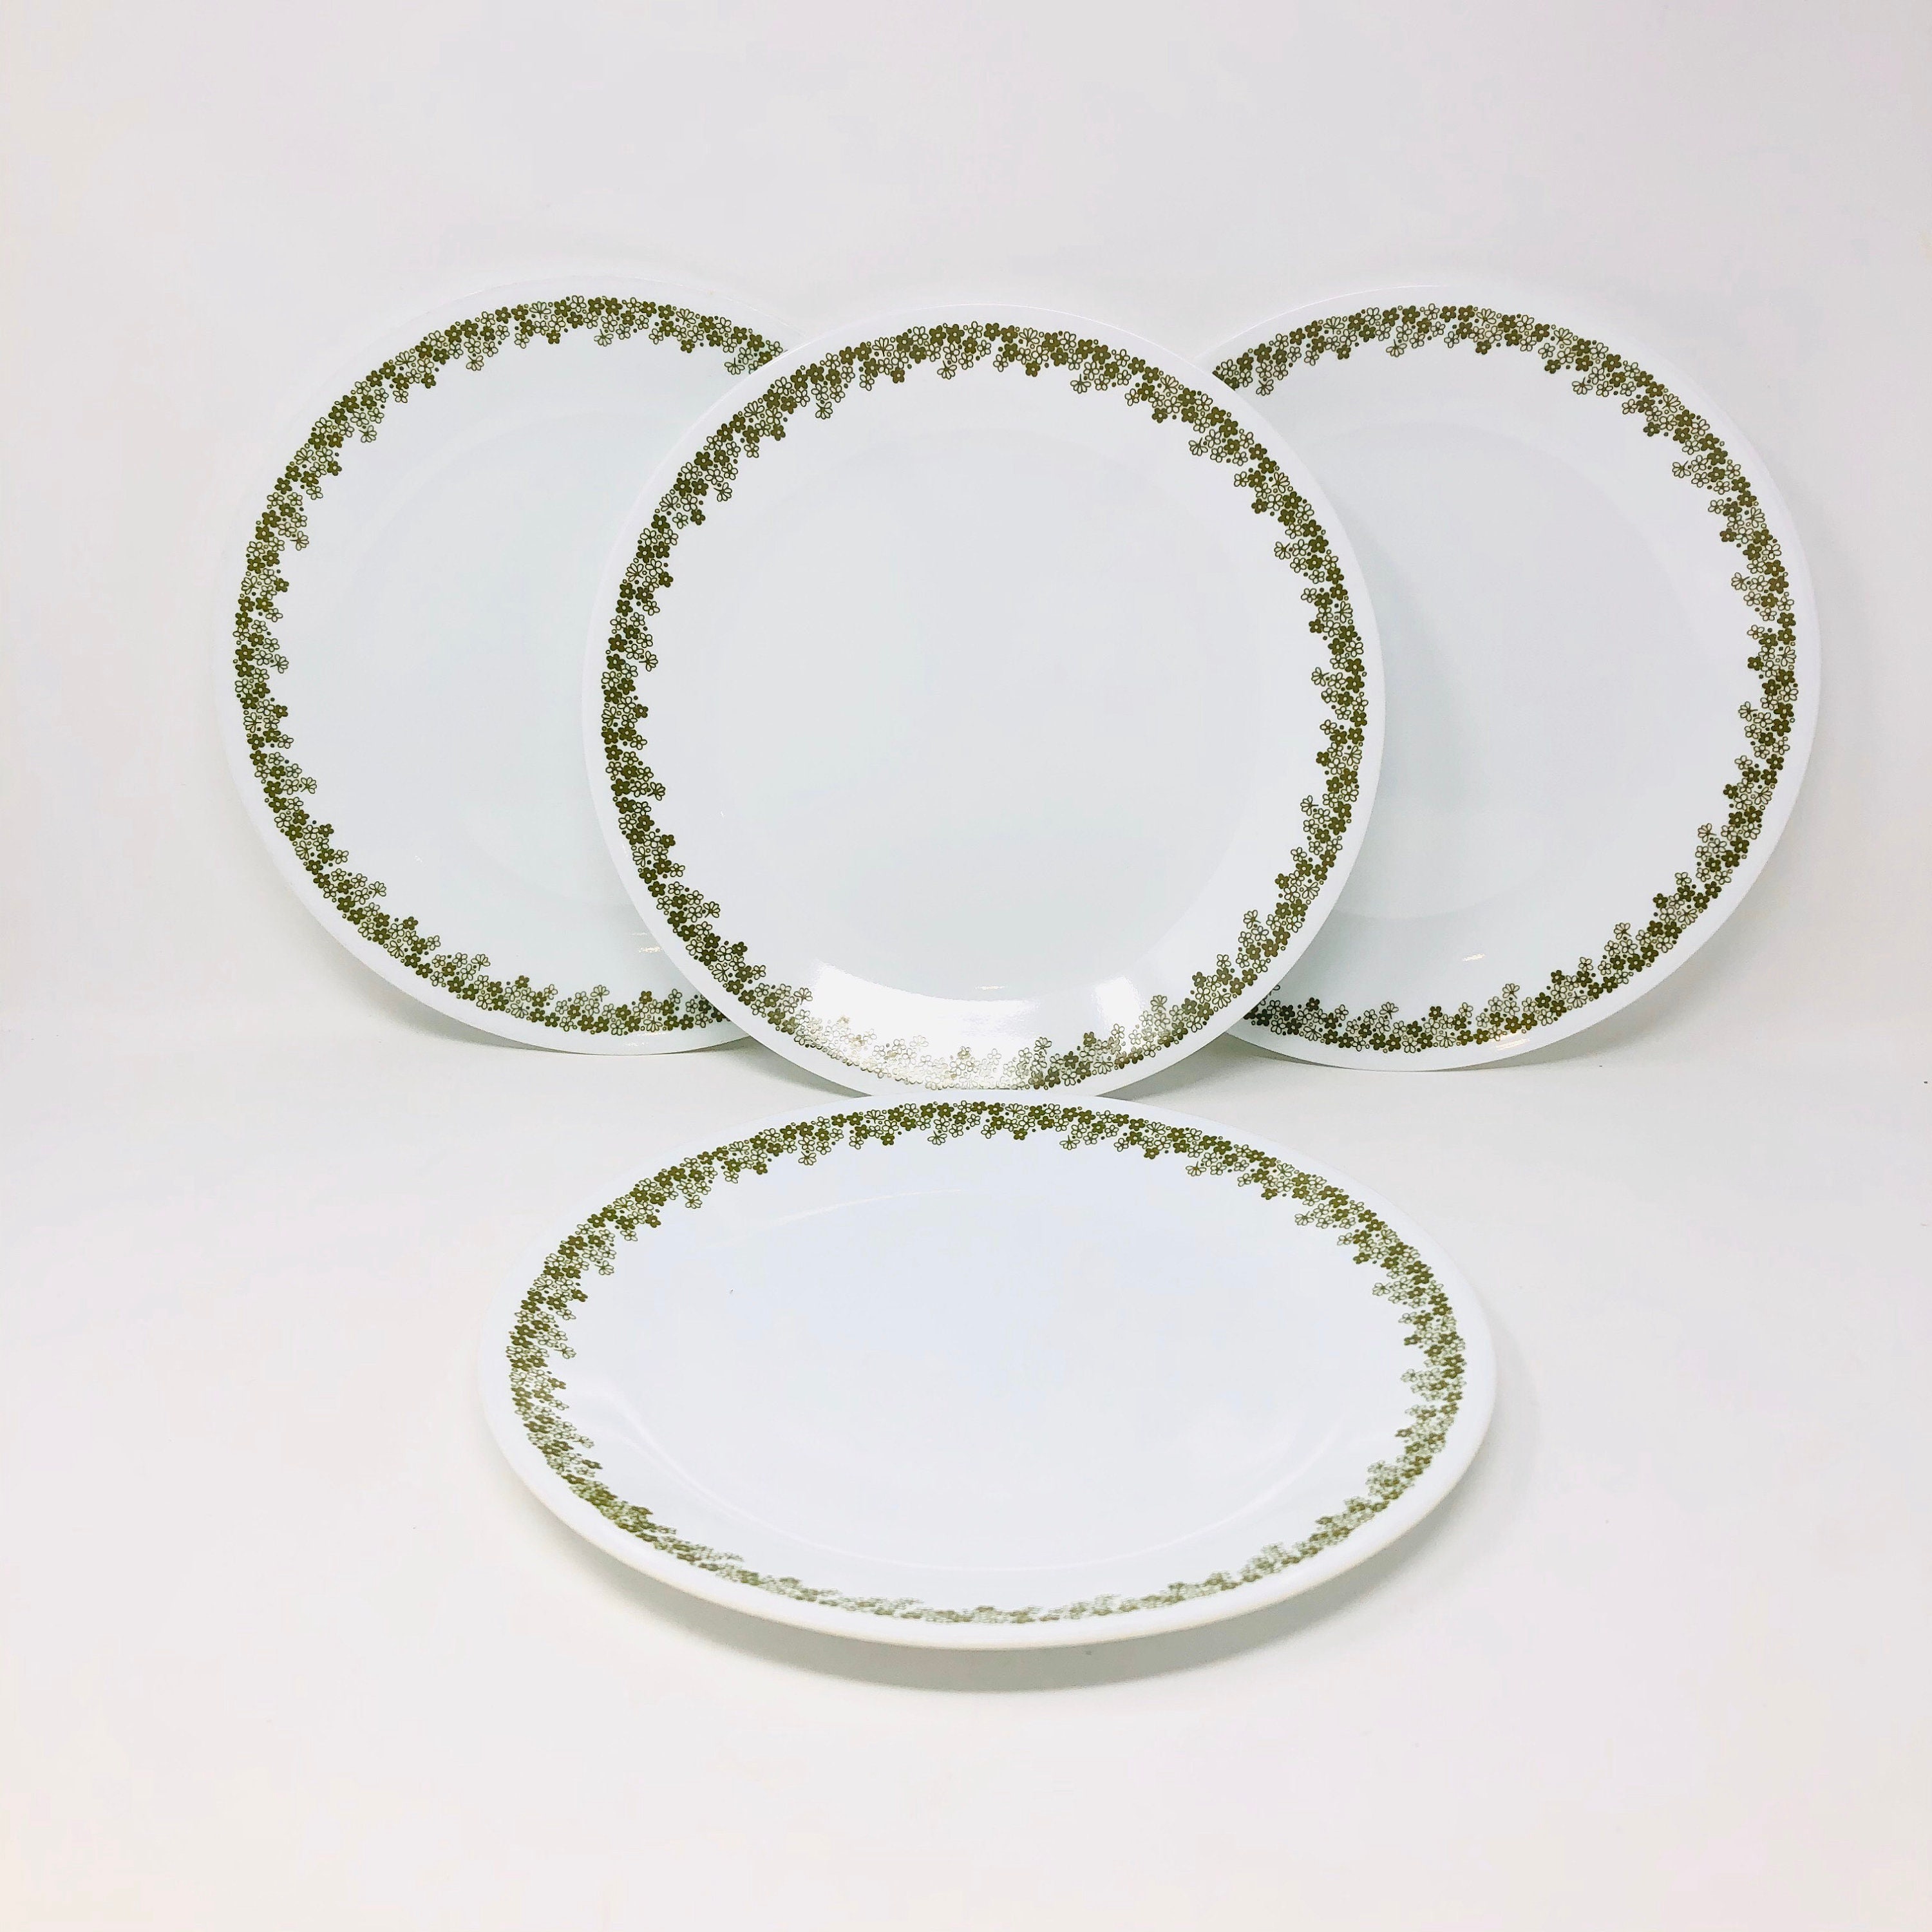 Corelle Vintage 1970's Spring Blossom Crazy Daisy 5 Piece Setting Dinnerware in Mint Condition